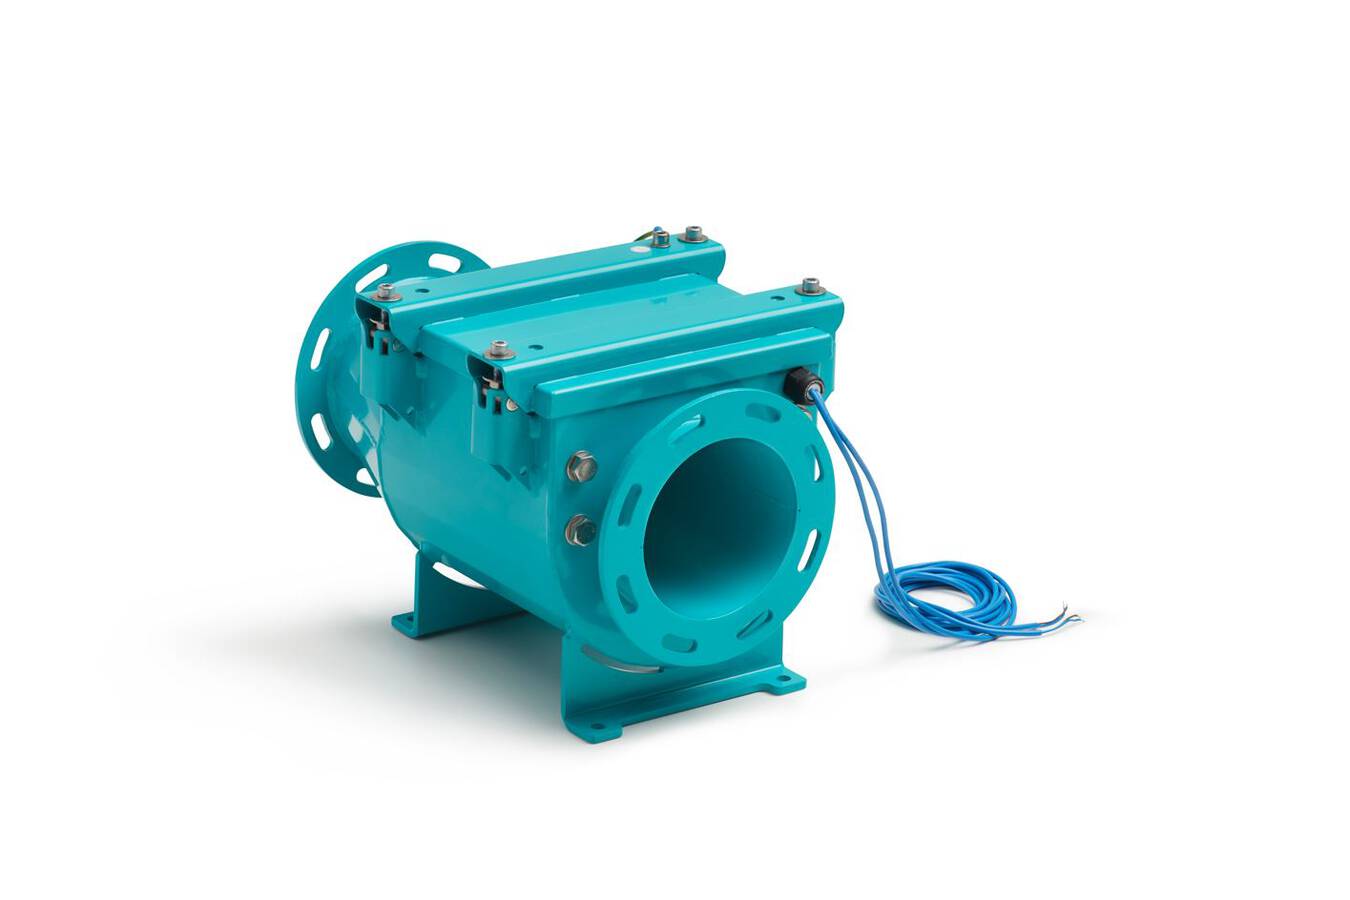 Explosion decoupling with the Q-Flap RX explosion isolation flap Decoupling is absolutely essential for holistic explosion protection. The Q-Flap RX provides effective and economical explosion isolation of plant components.
